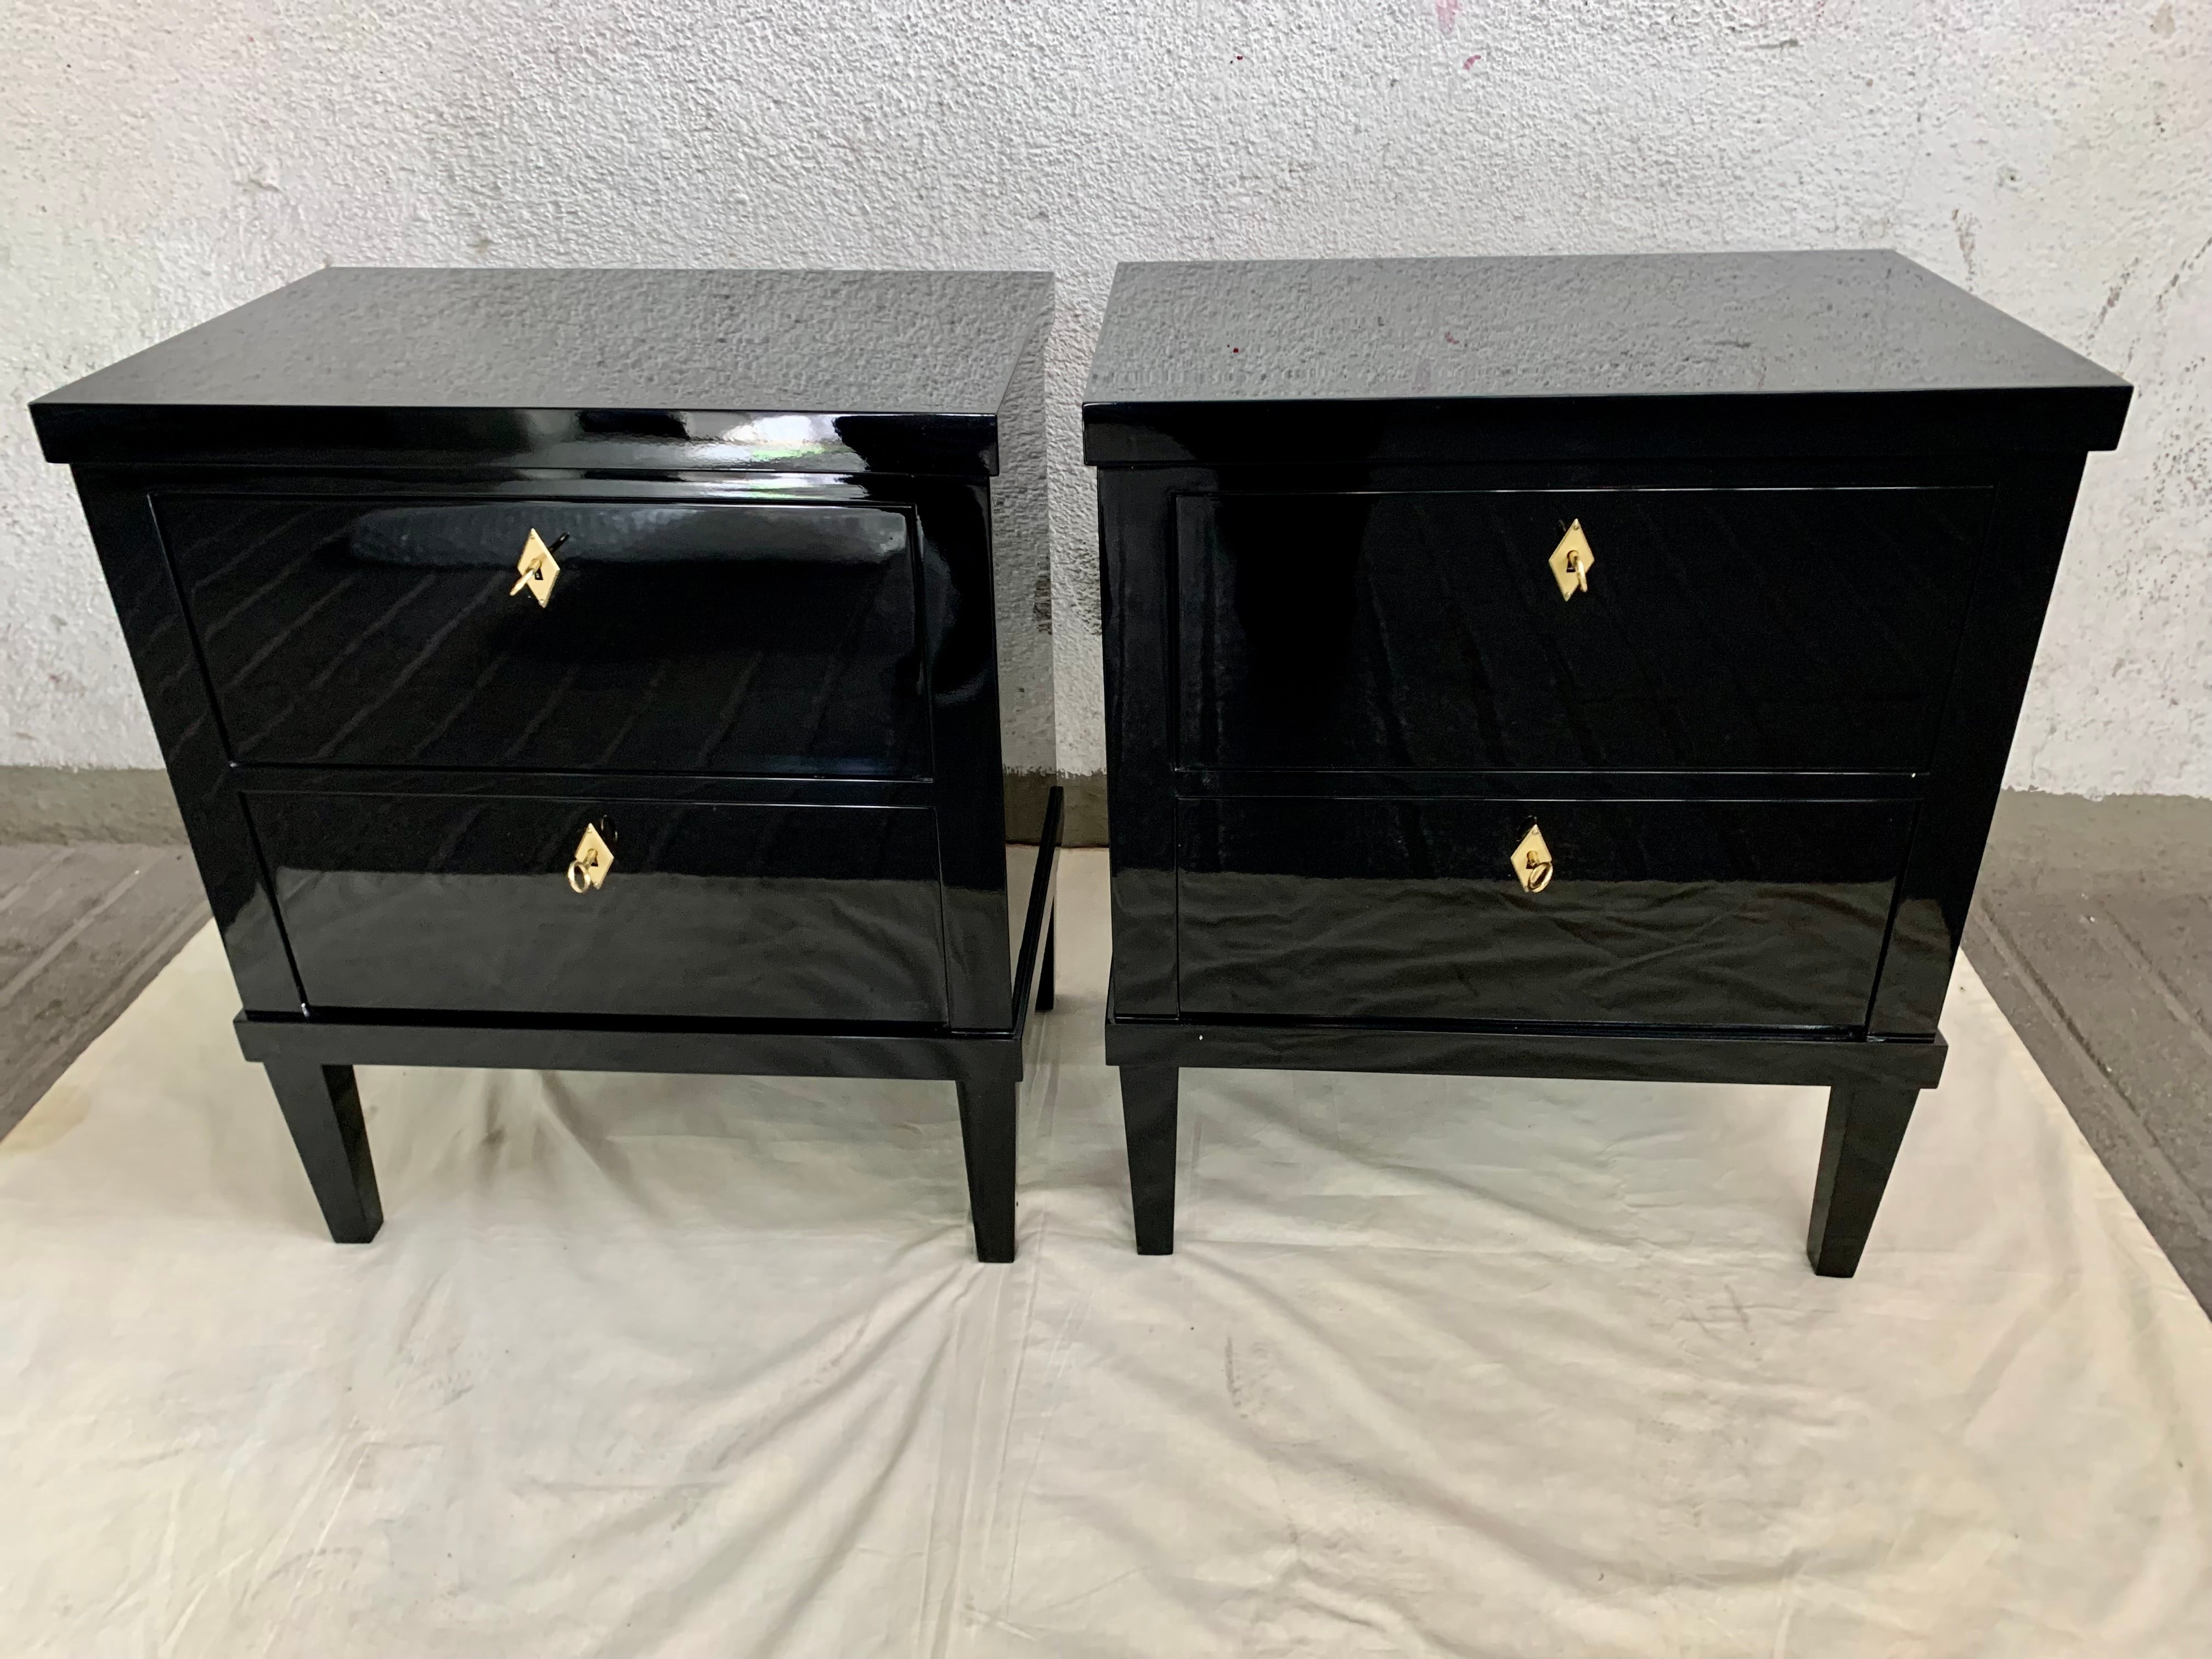 Pair of small commodes or night tables, in Biedermeier style, with two drawers.
The commodes are a handmade production, made by us, our craftsman cabinrtmarker and a craftsman lacquer in beech wood, the drawers boxes are made of Spanish pine, with